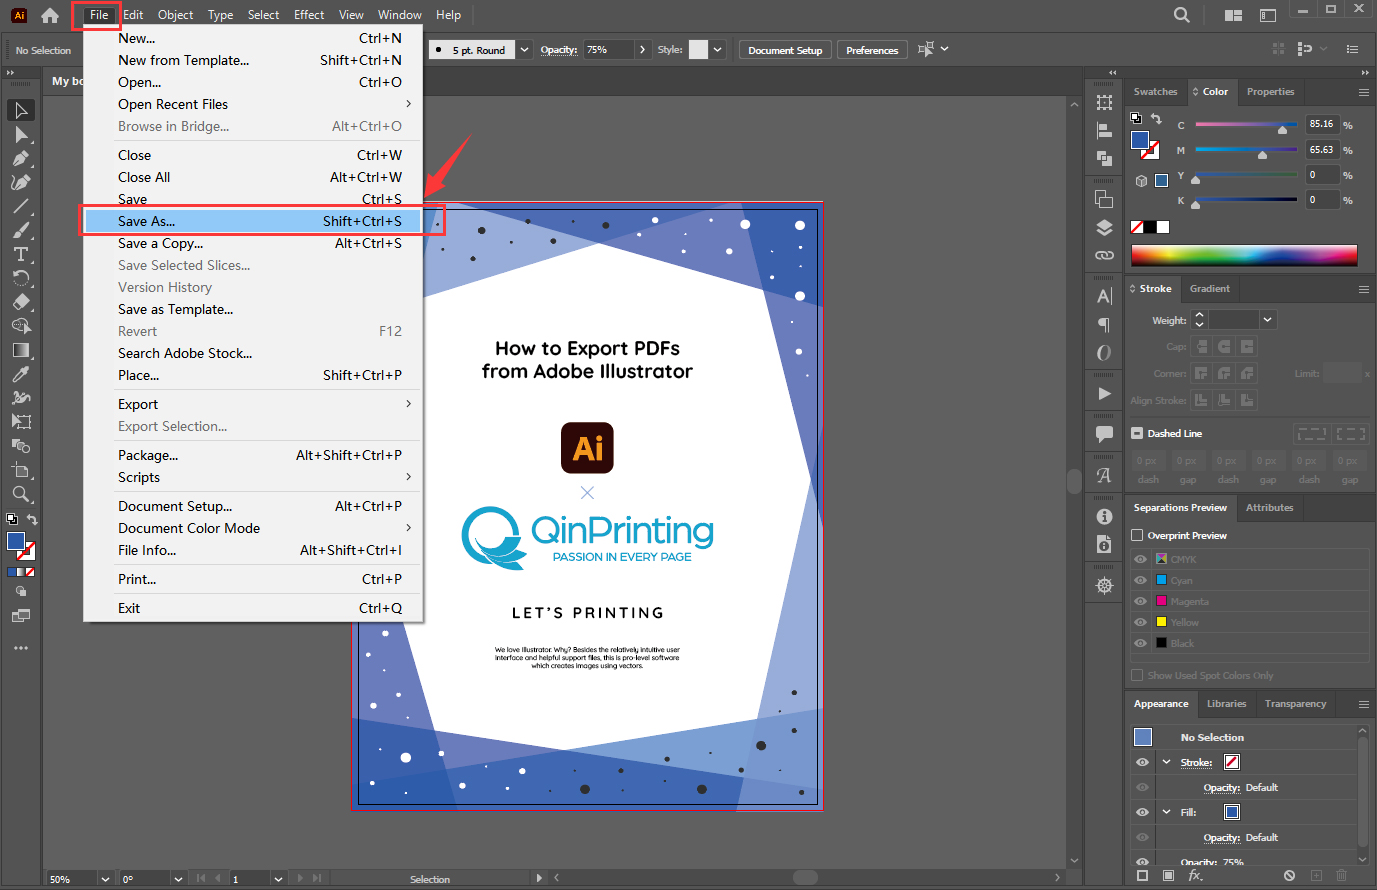 How to Export PDFs from Adobe Illustrator step 1